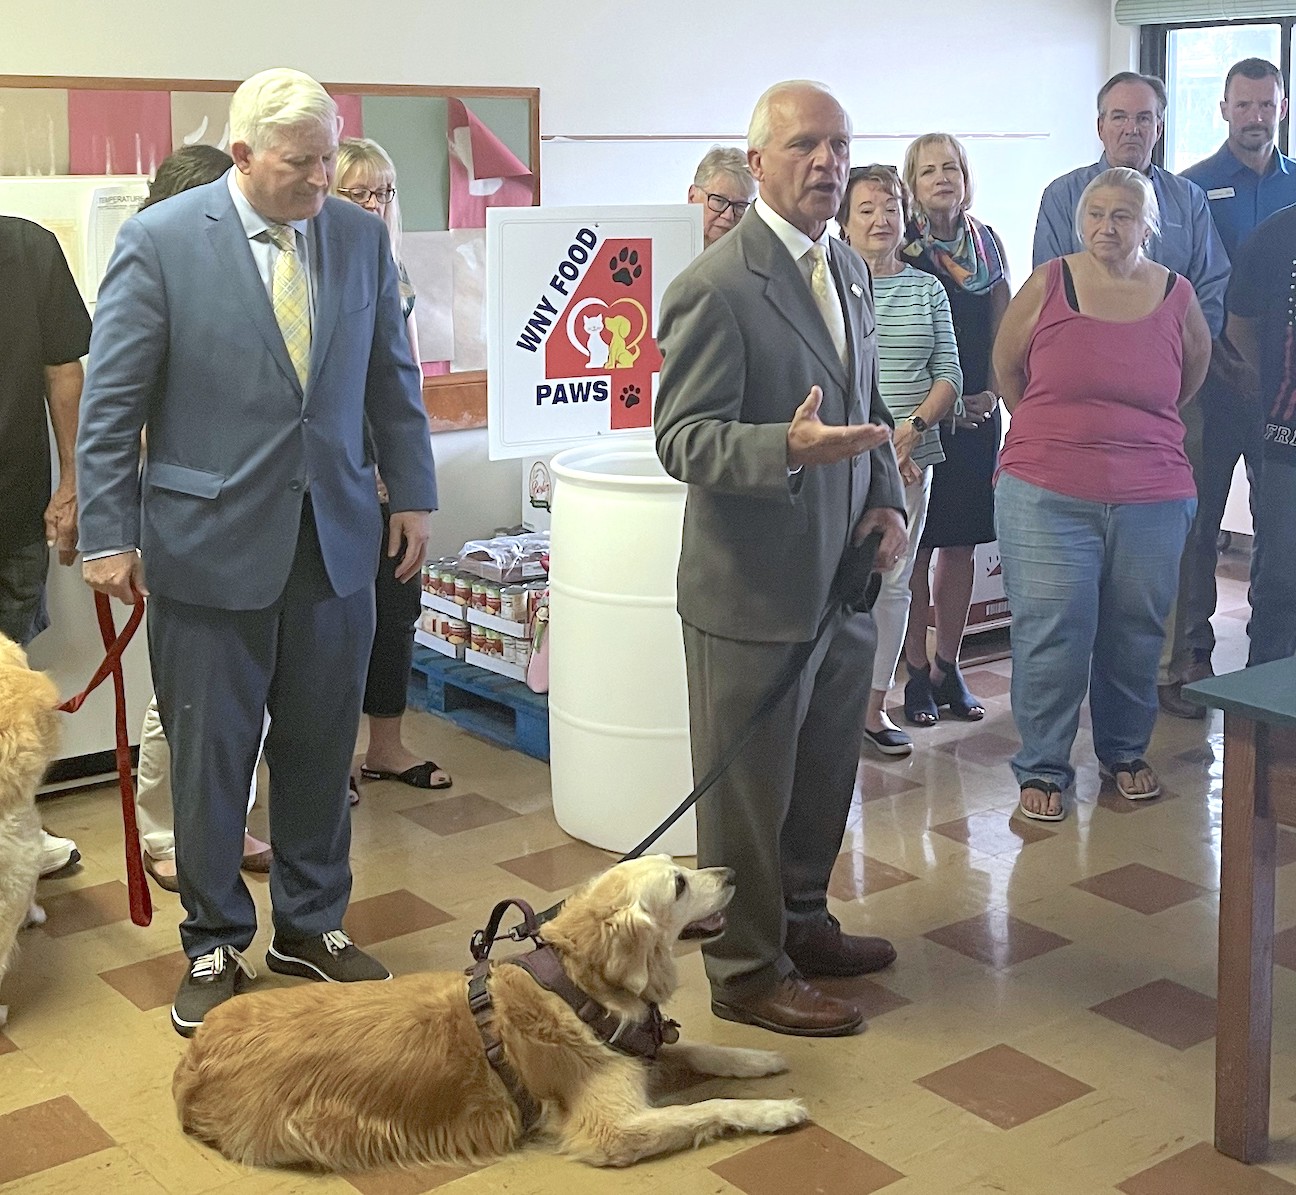 Niagara County Clerk Joseph A. Jastrzemski speaks at the WNY Food 4 Paws event with Erie County Clerk Mickey Kearns on his left. (Submitted)